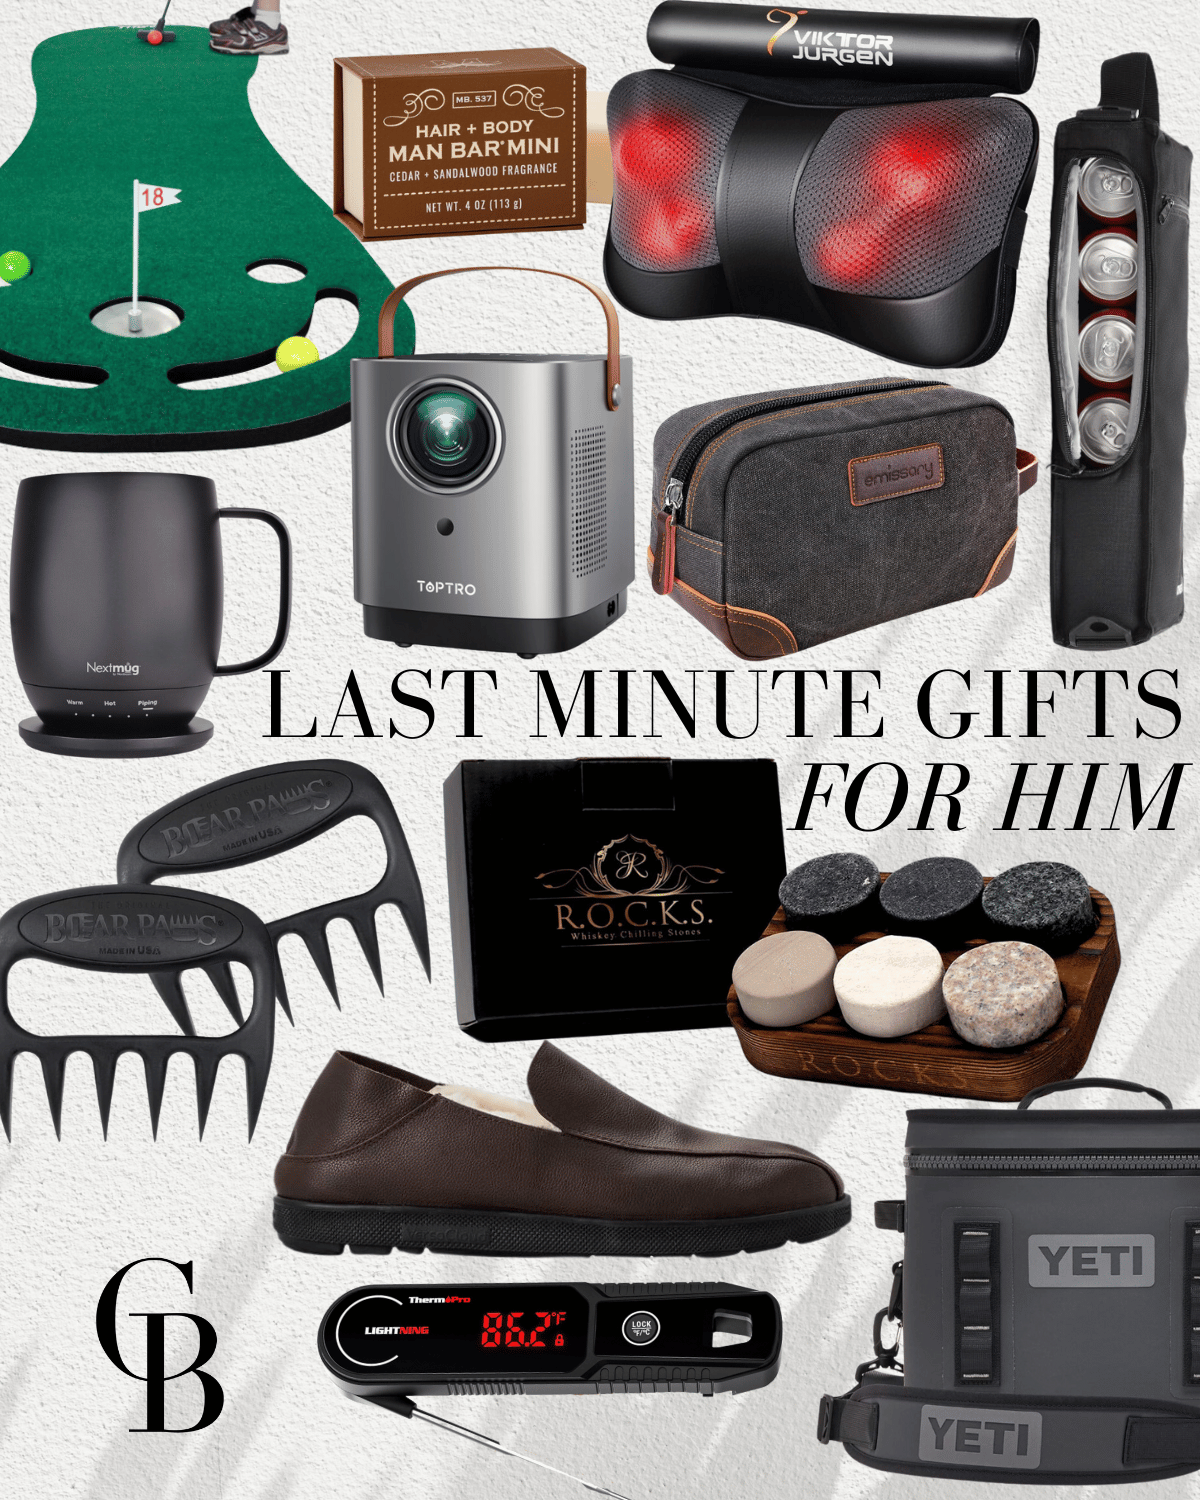 last minute gift ideas | #last #minute #gifts #giftideas #giftsforhim #giftforhim #him #giftforhusband #golfgift #outdoors #slippers #whiskeystones #mug #meatclaws #projector #travel